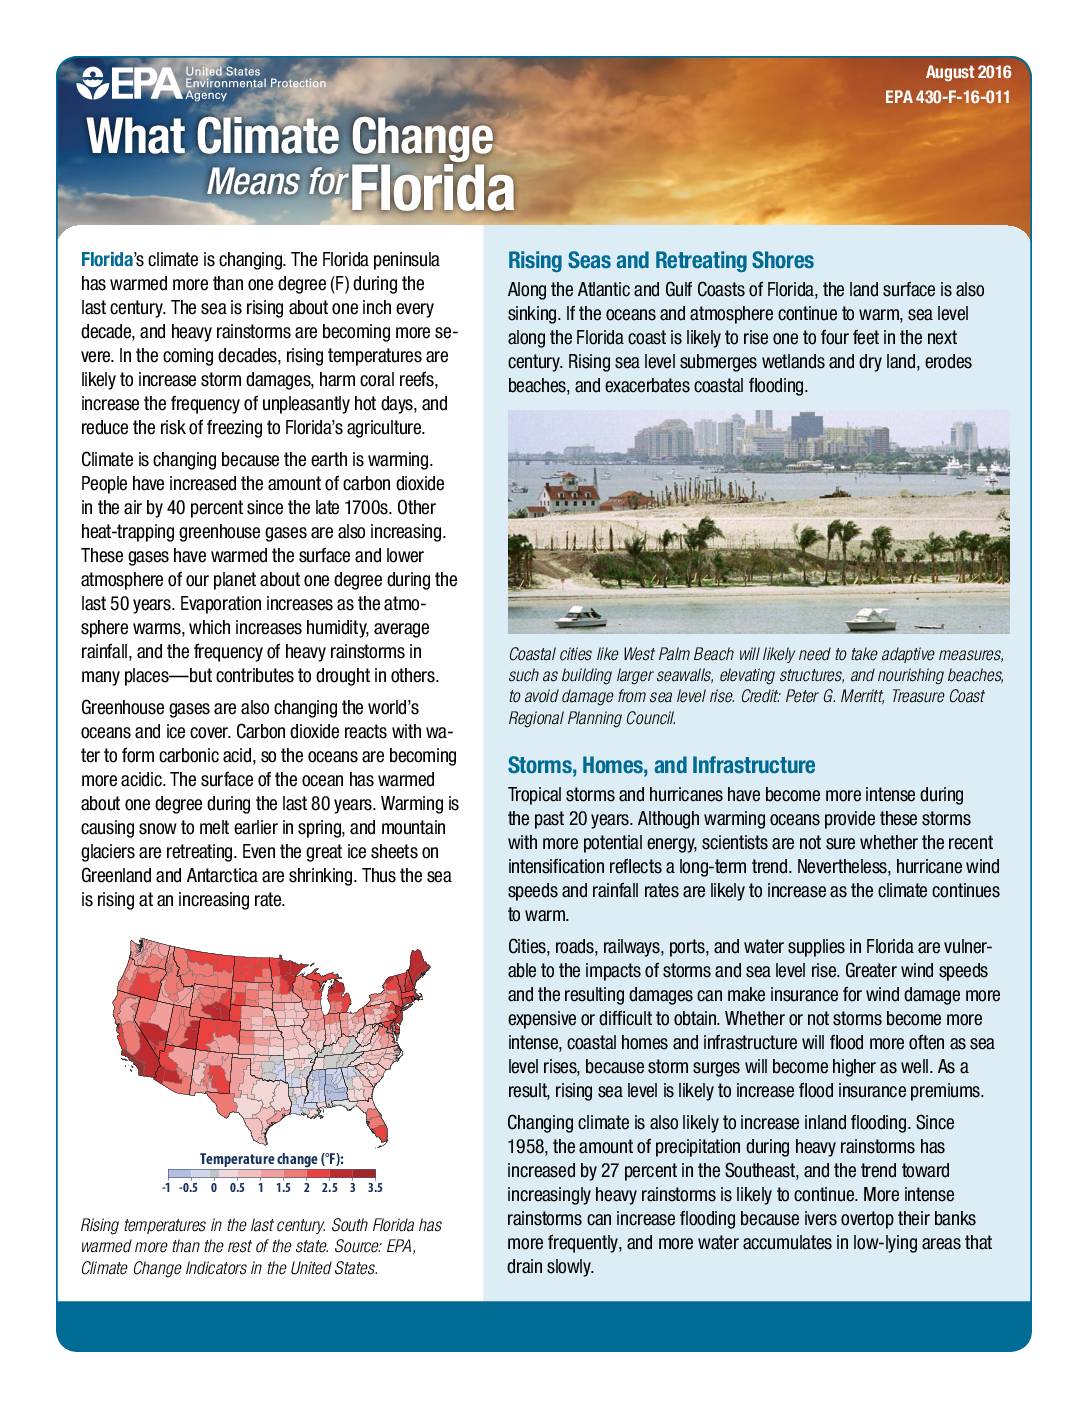 U.S. Environmental Protection Agency: What Climate Change Means for Florida (2016)